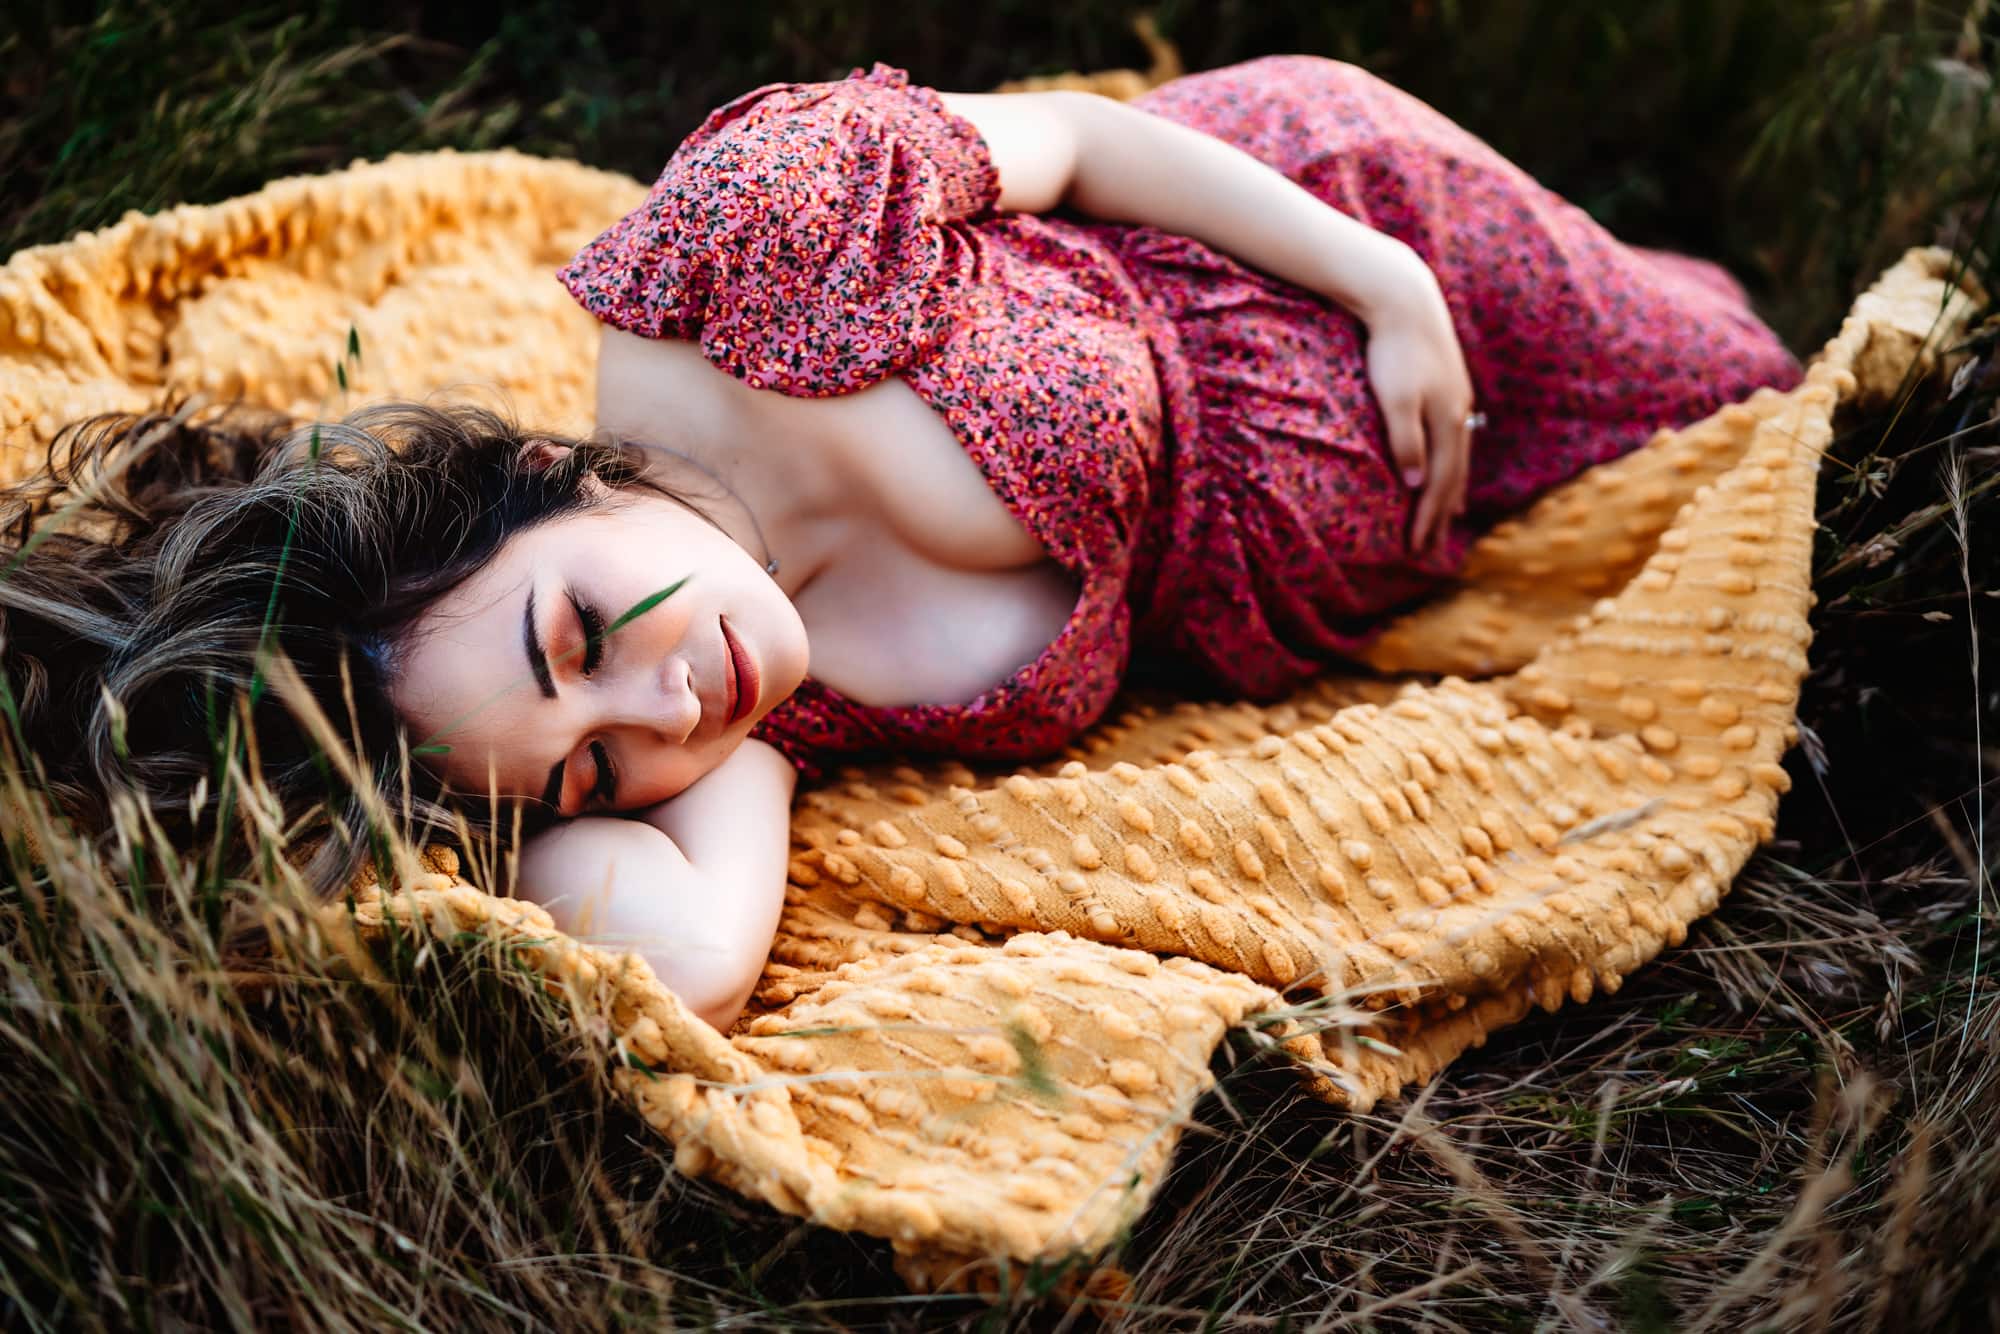 A pregnant woman in a pink dress laying on a yellow blanket holding her belly and closing her eyes during a San Diego lifestyle maternity session by Love Michelle Photography.